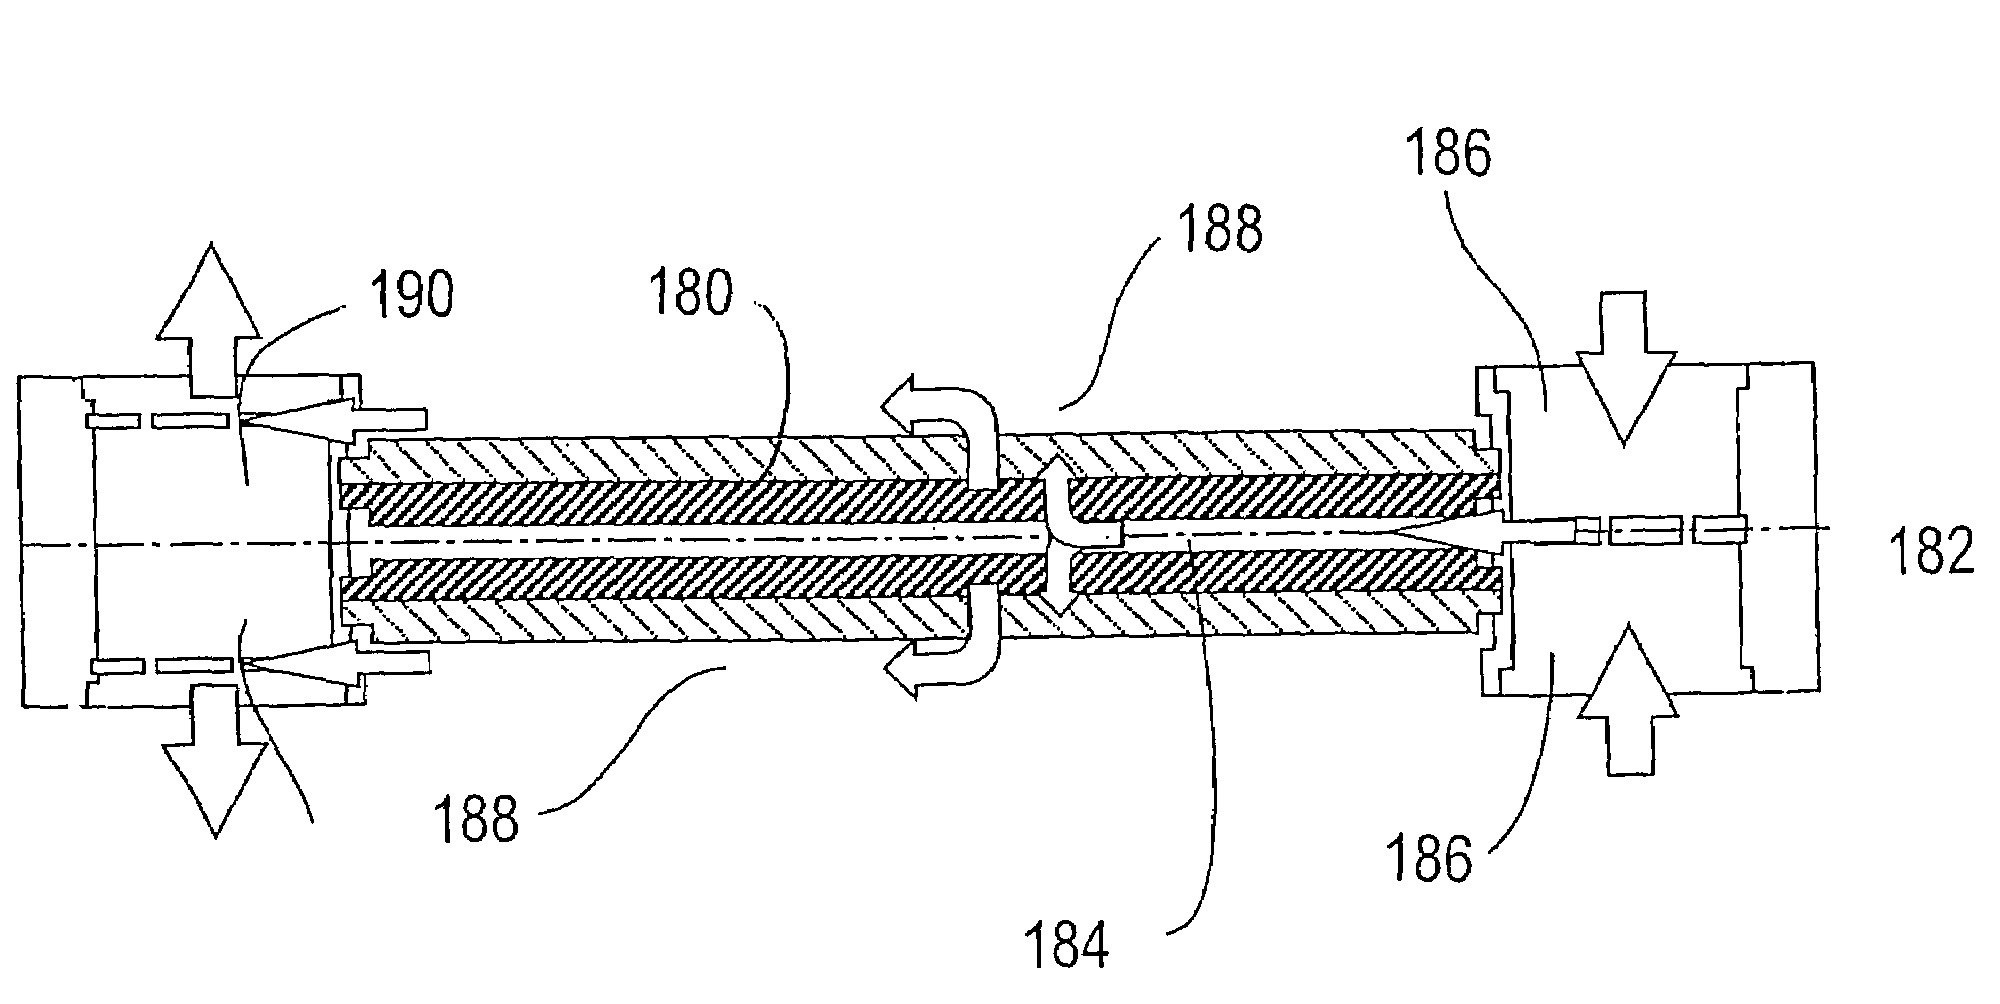 Prefilter system for biological systems